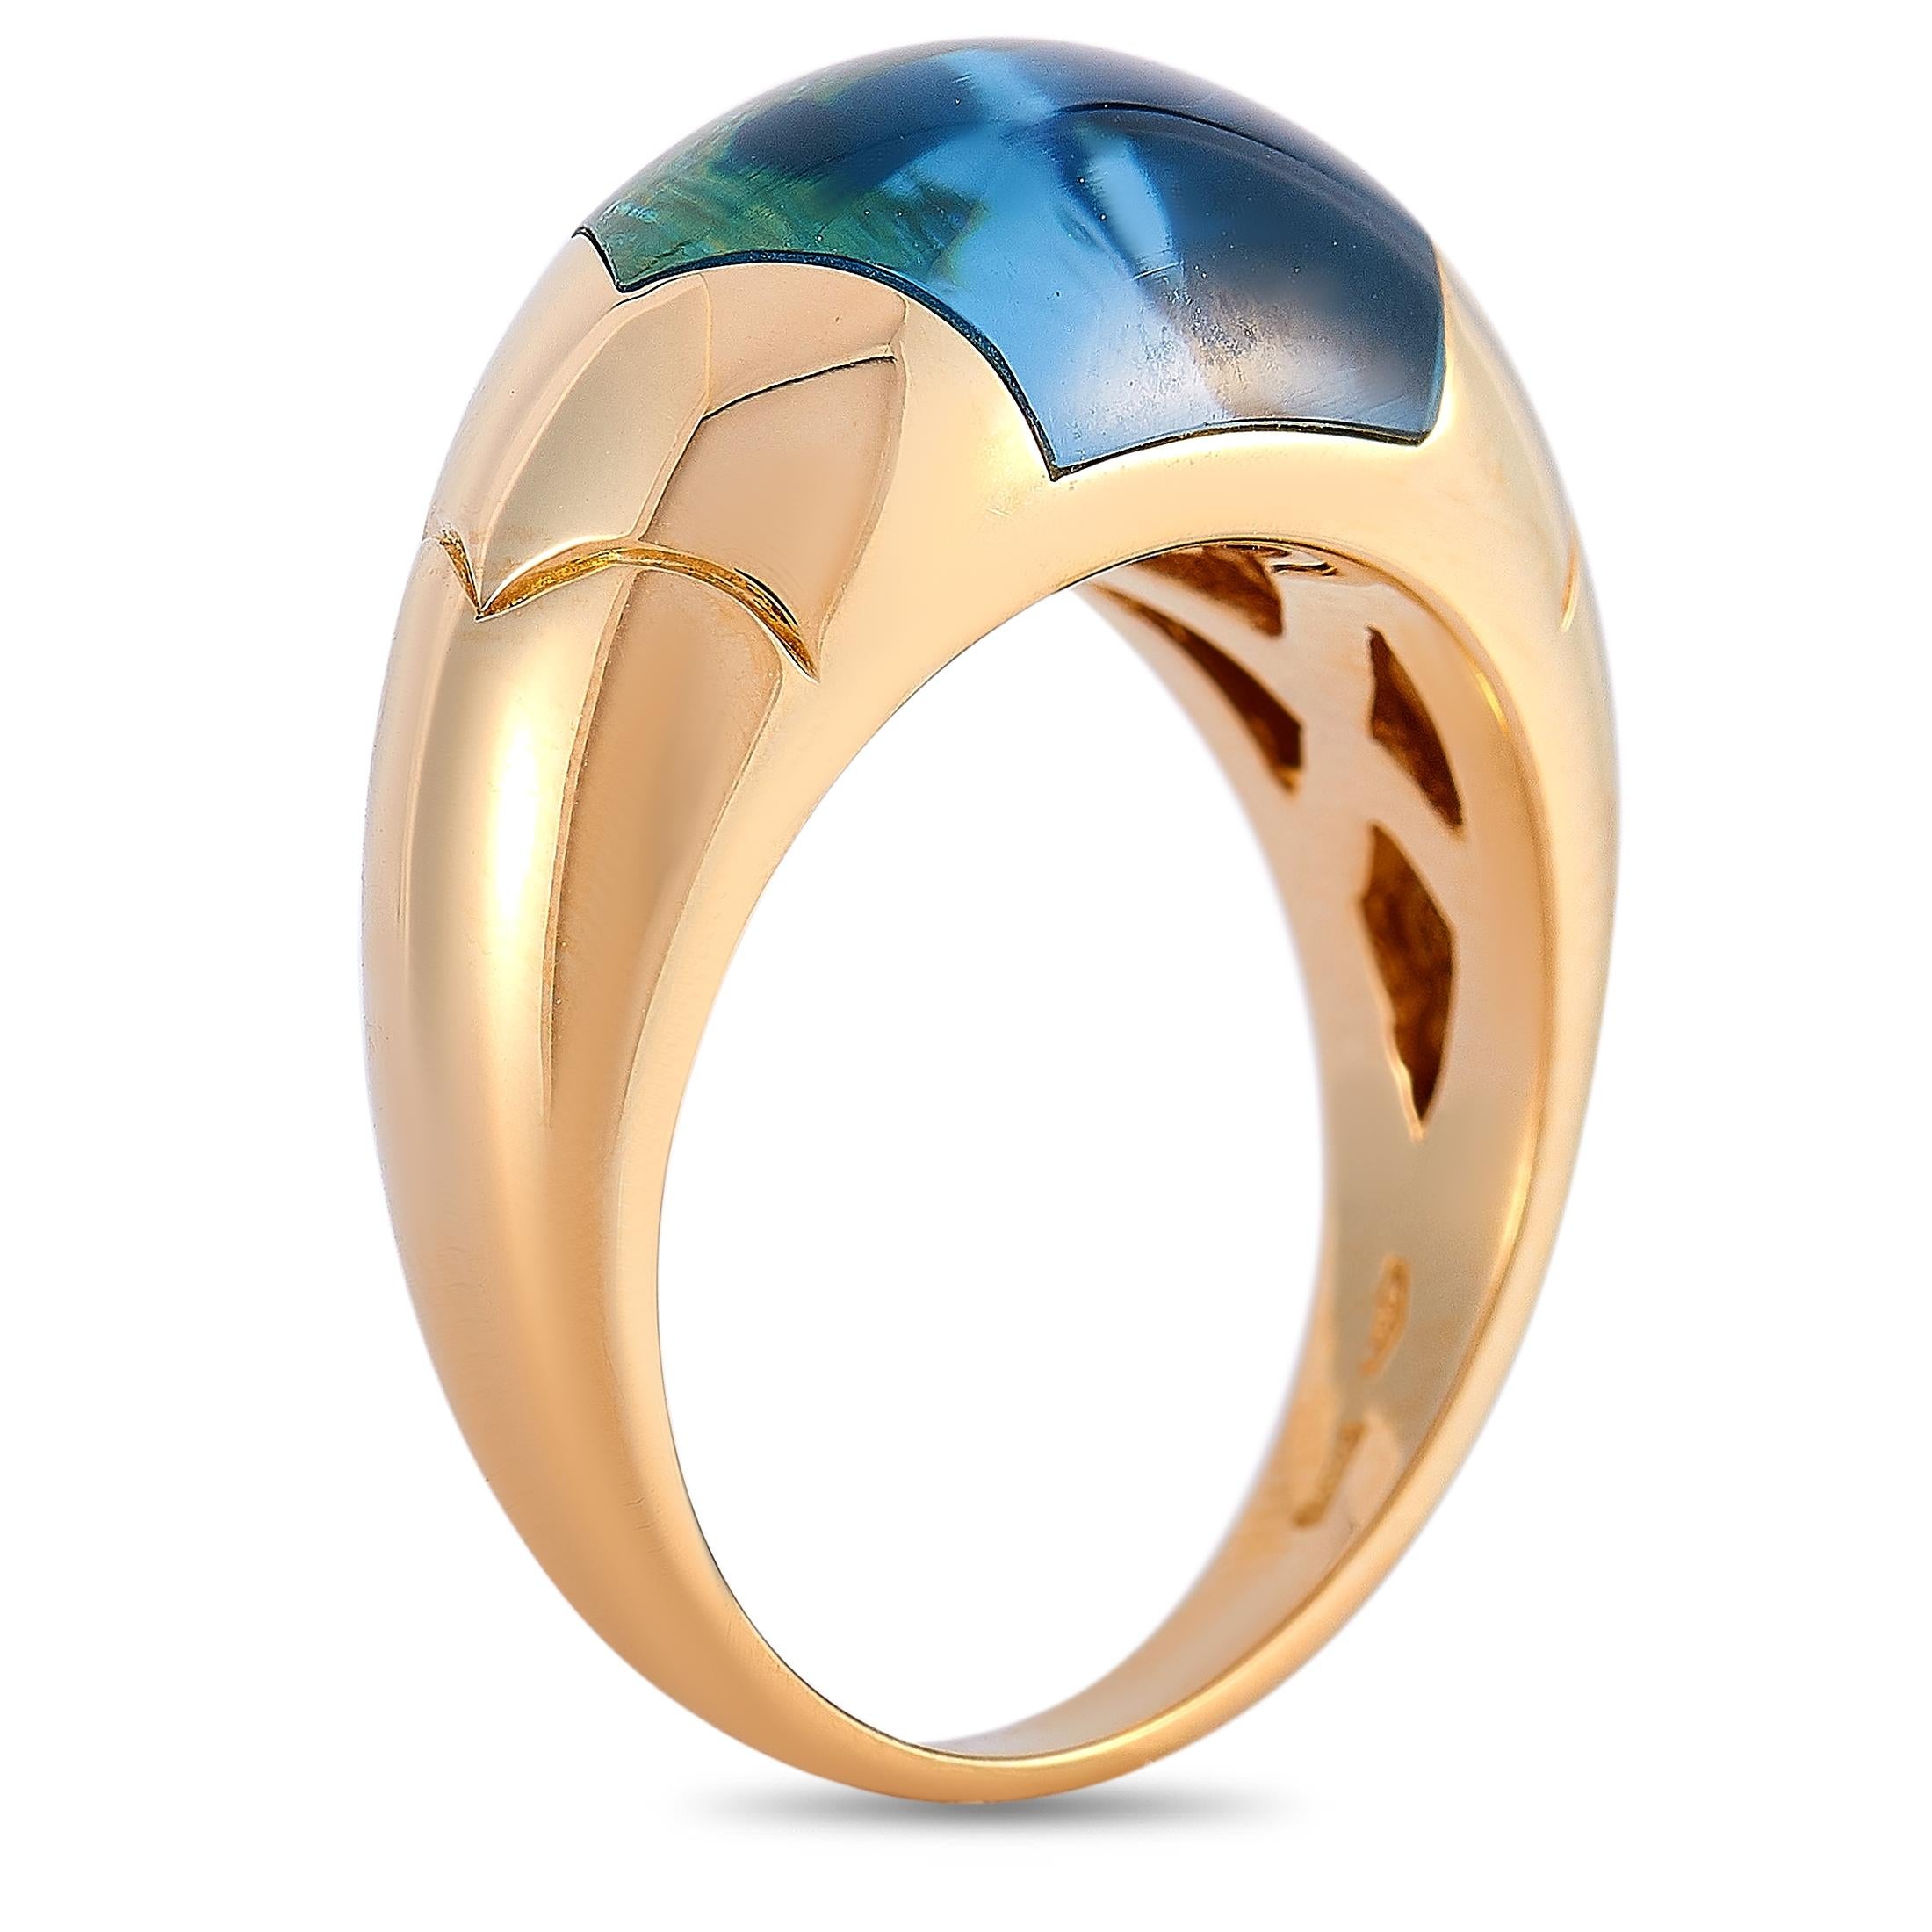 This Bvlgari ring is made out of 18K yellow gold and topaz and weighs 9.5 grams. The ring boasts band thickness of 2 mm and top height of 6 mm, while top dimensions measure 13 by 10 mm.
 
 Offered in estate condition, this jewelry piece includes the